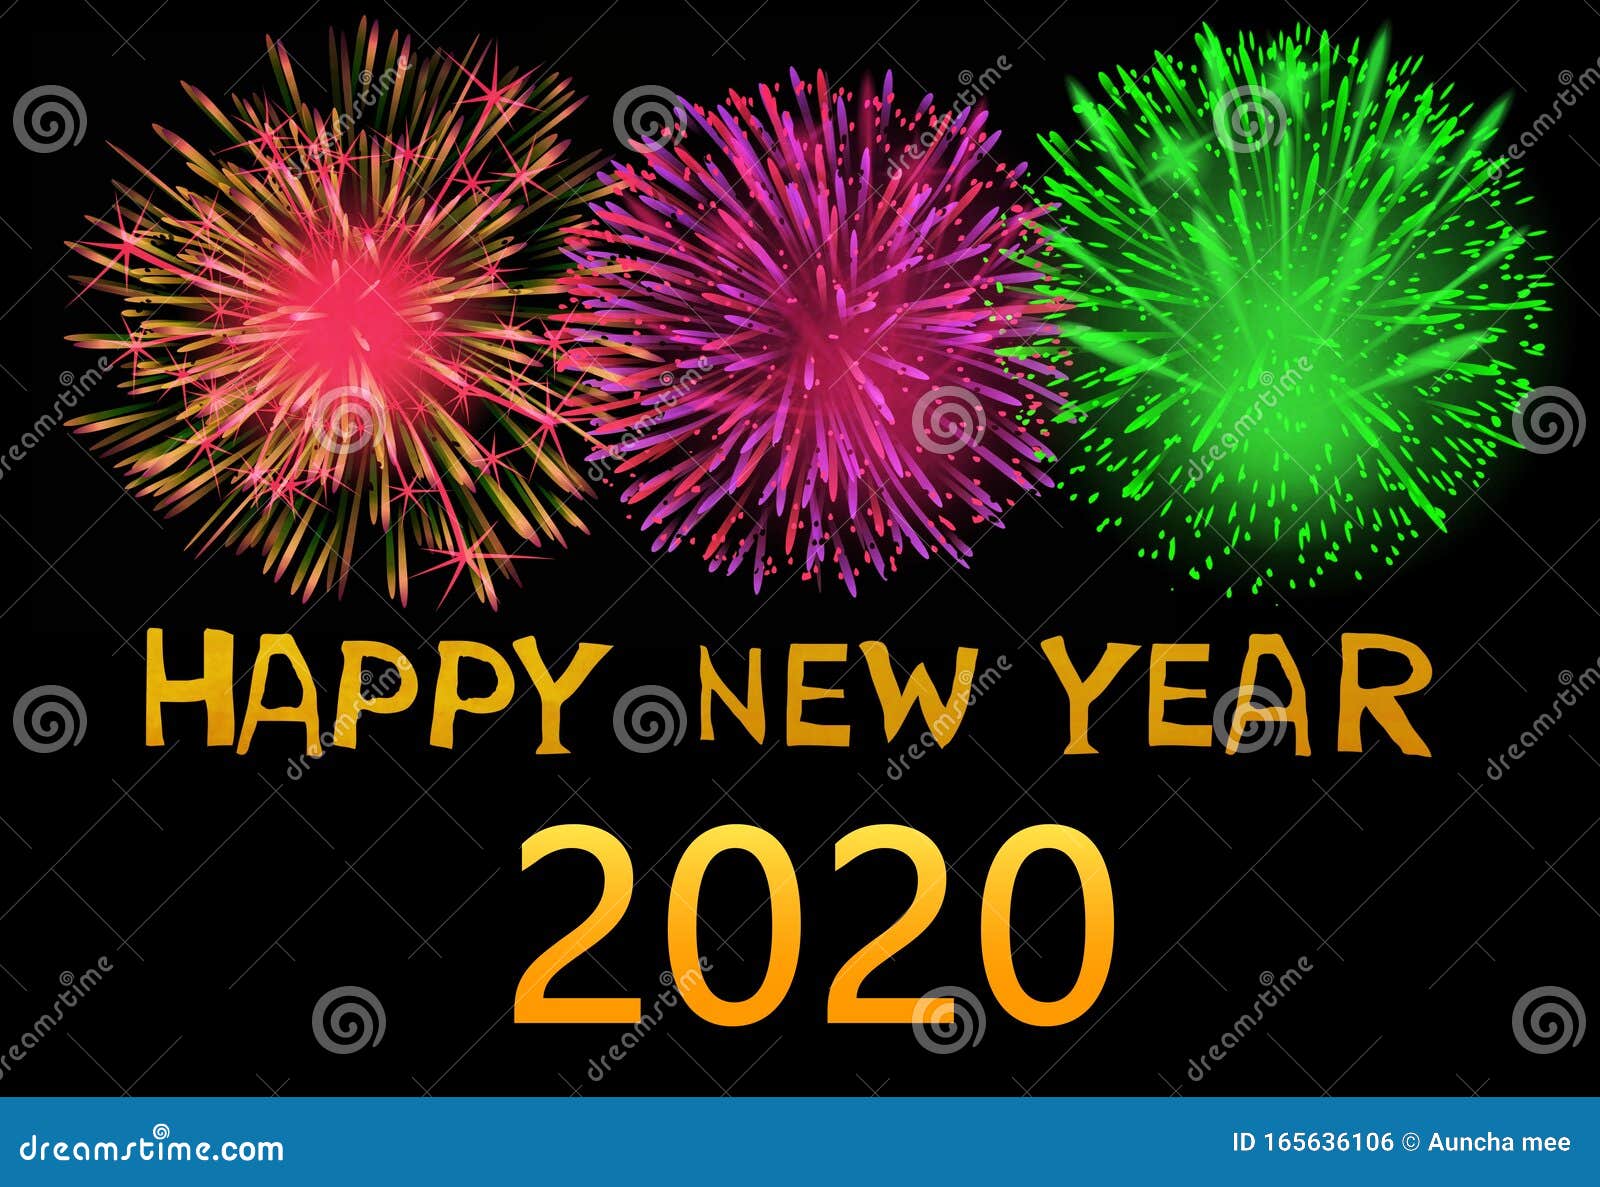 Happy New Year 2020 With Fireworks On Dark Background Stock